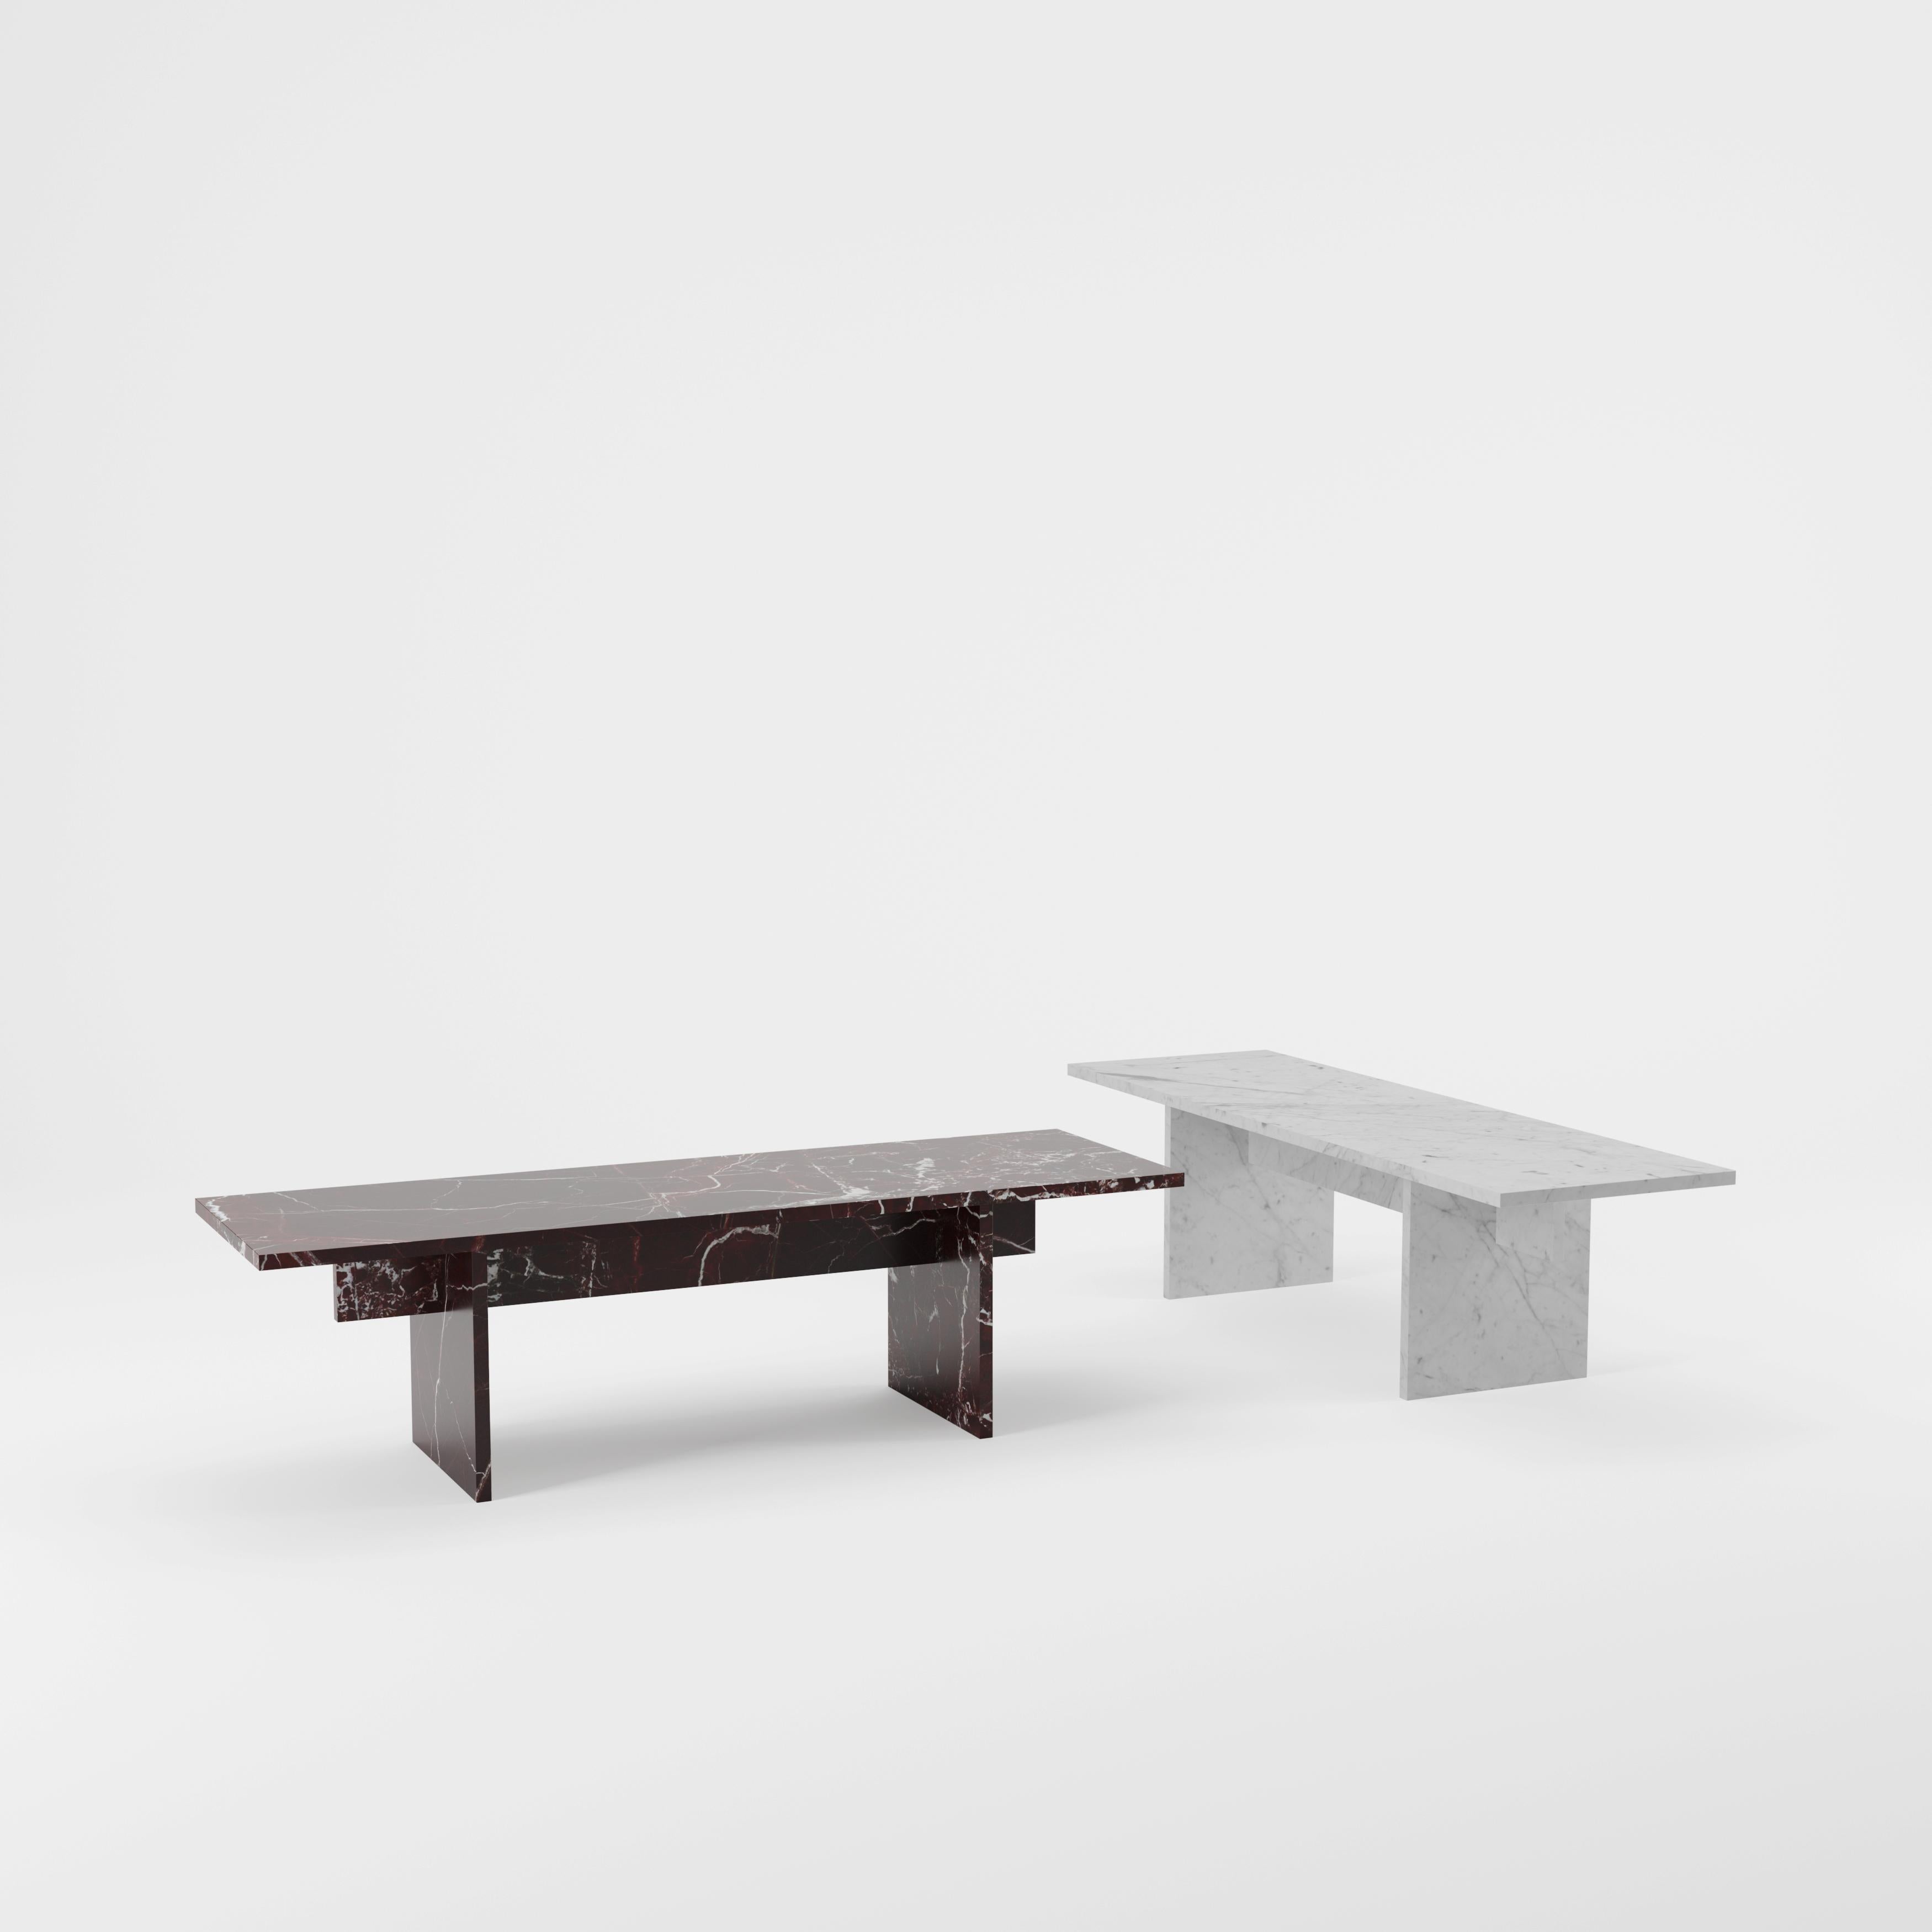 Minimalist Vondel Coffee Table/Bench Handcrafted in Honed Bianco Carrara Marble